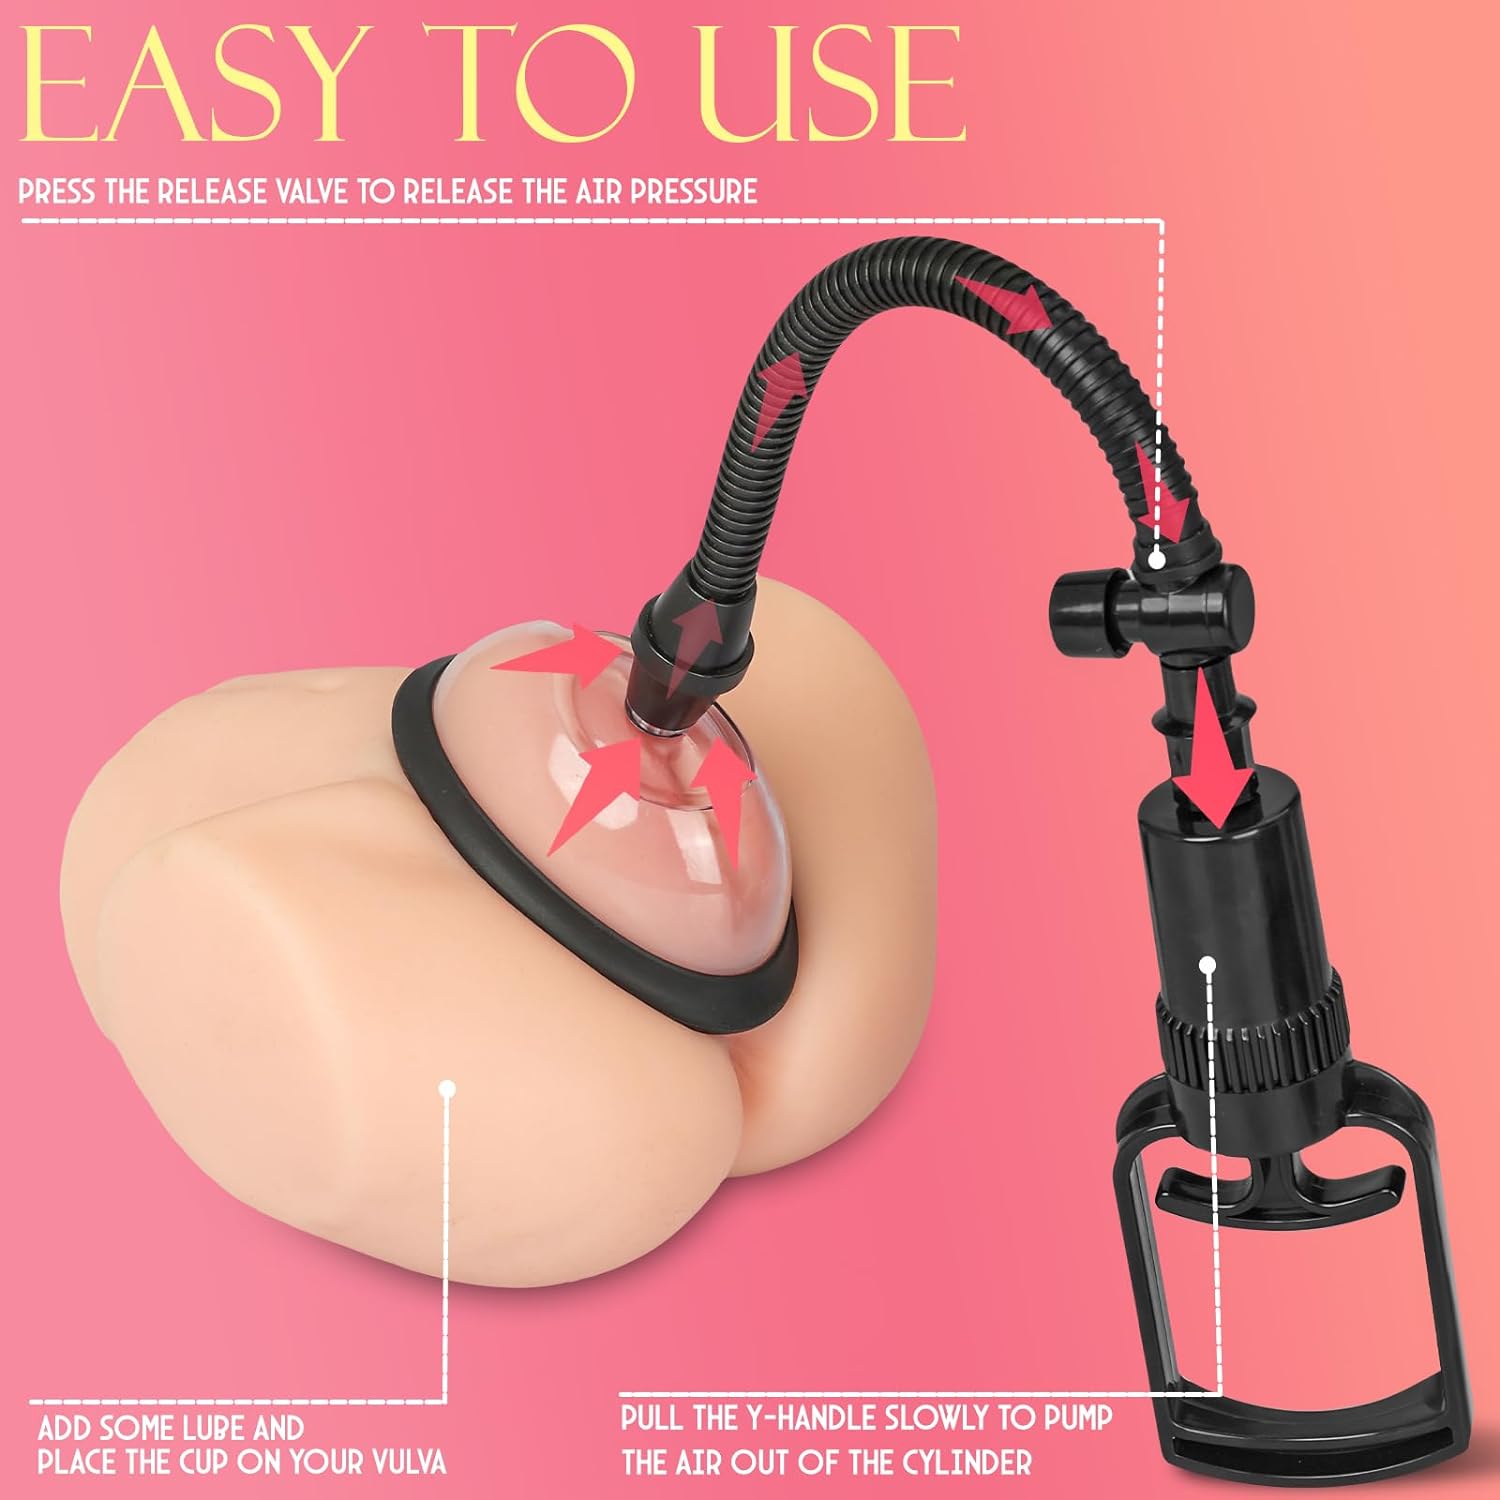 Yeqiz Pussy Pump Sex Toys for Female, Sexual Enhancers Manual Vagina Pump for Intense Stimulation, Adult Toys Clitoral Stimulator to Increases Sensation,Nipple Enhances Sexual Pleasure Tools for Women